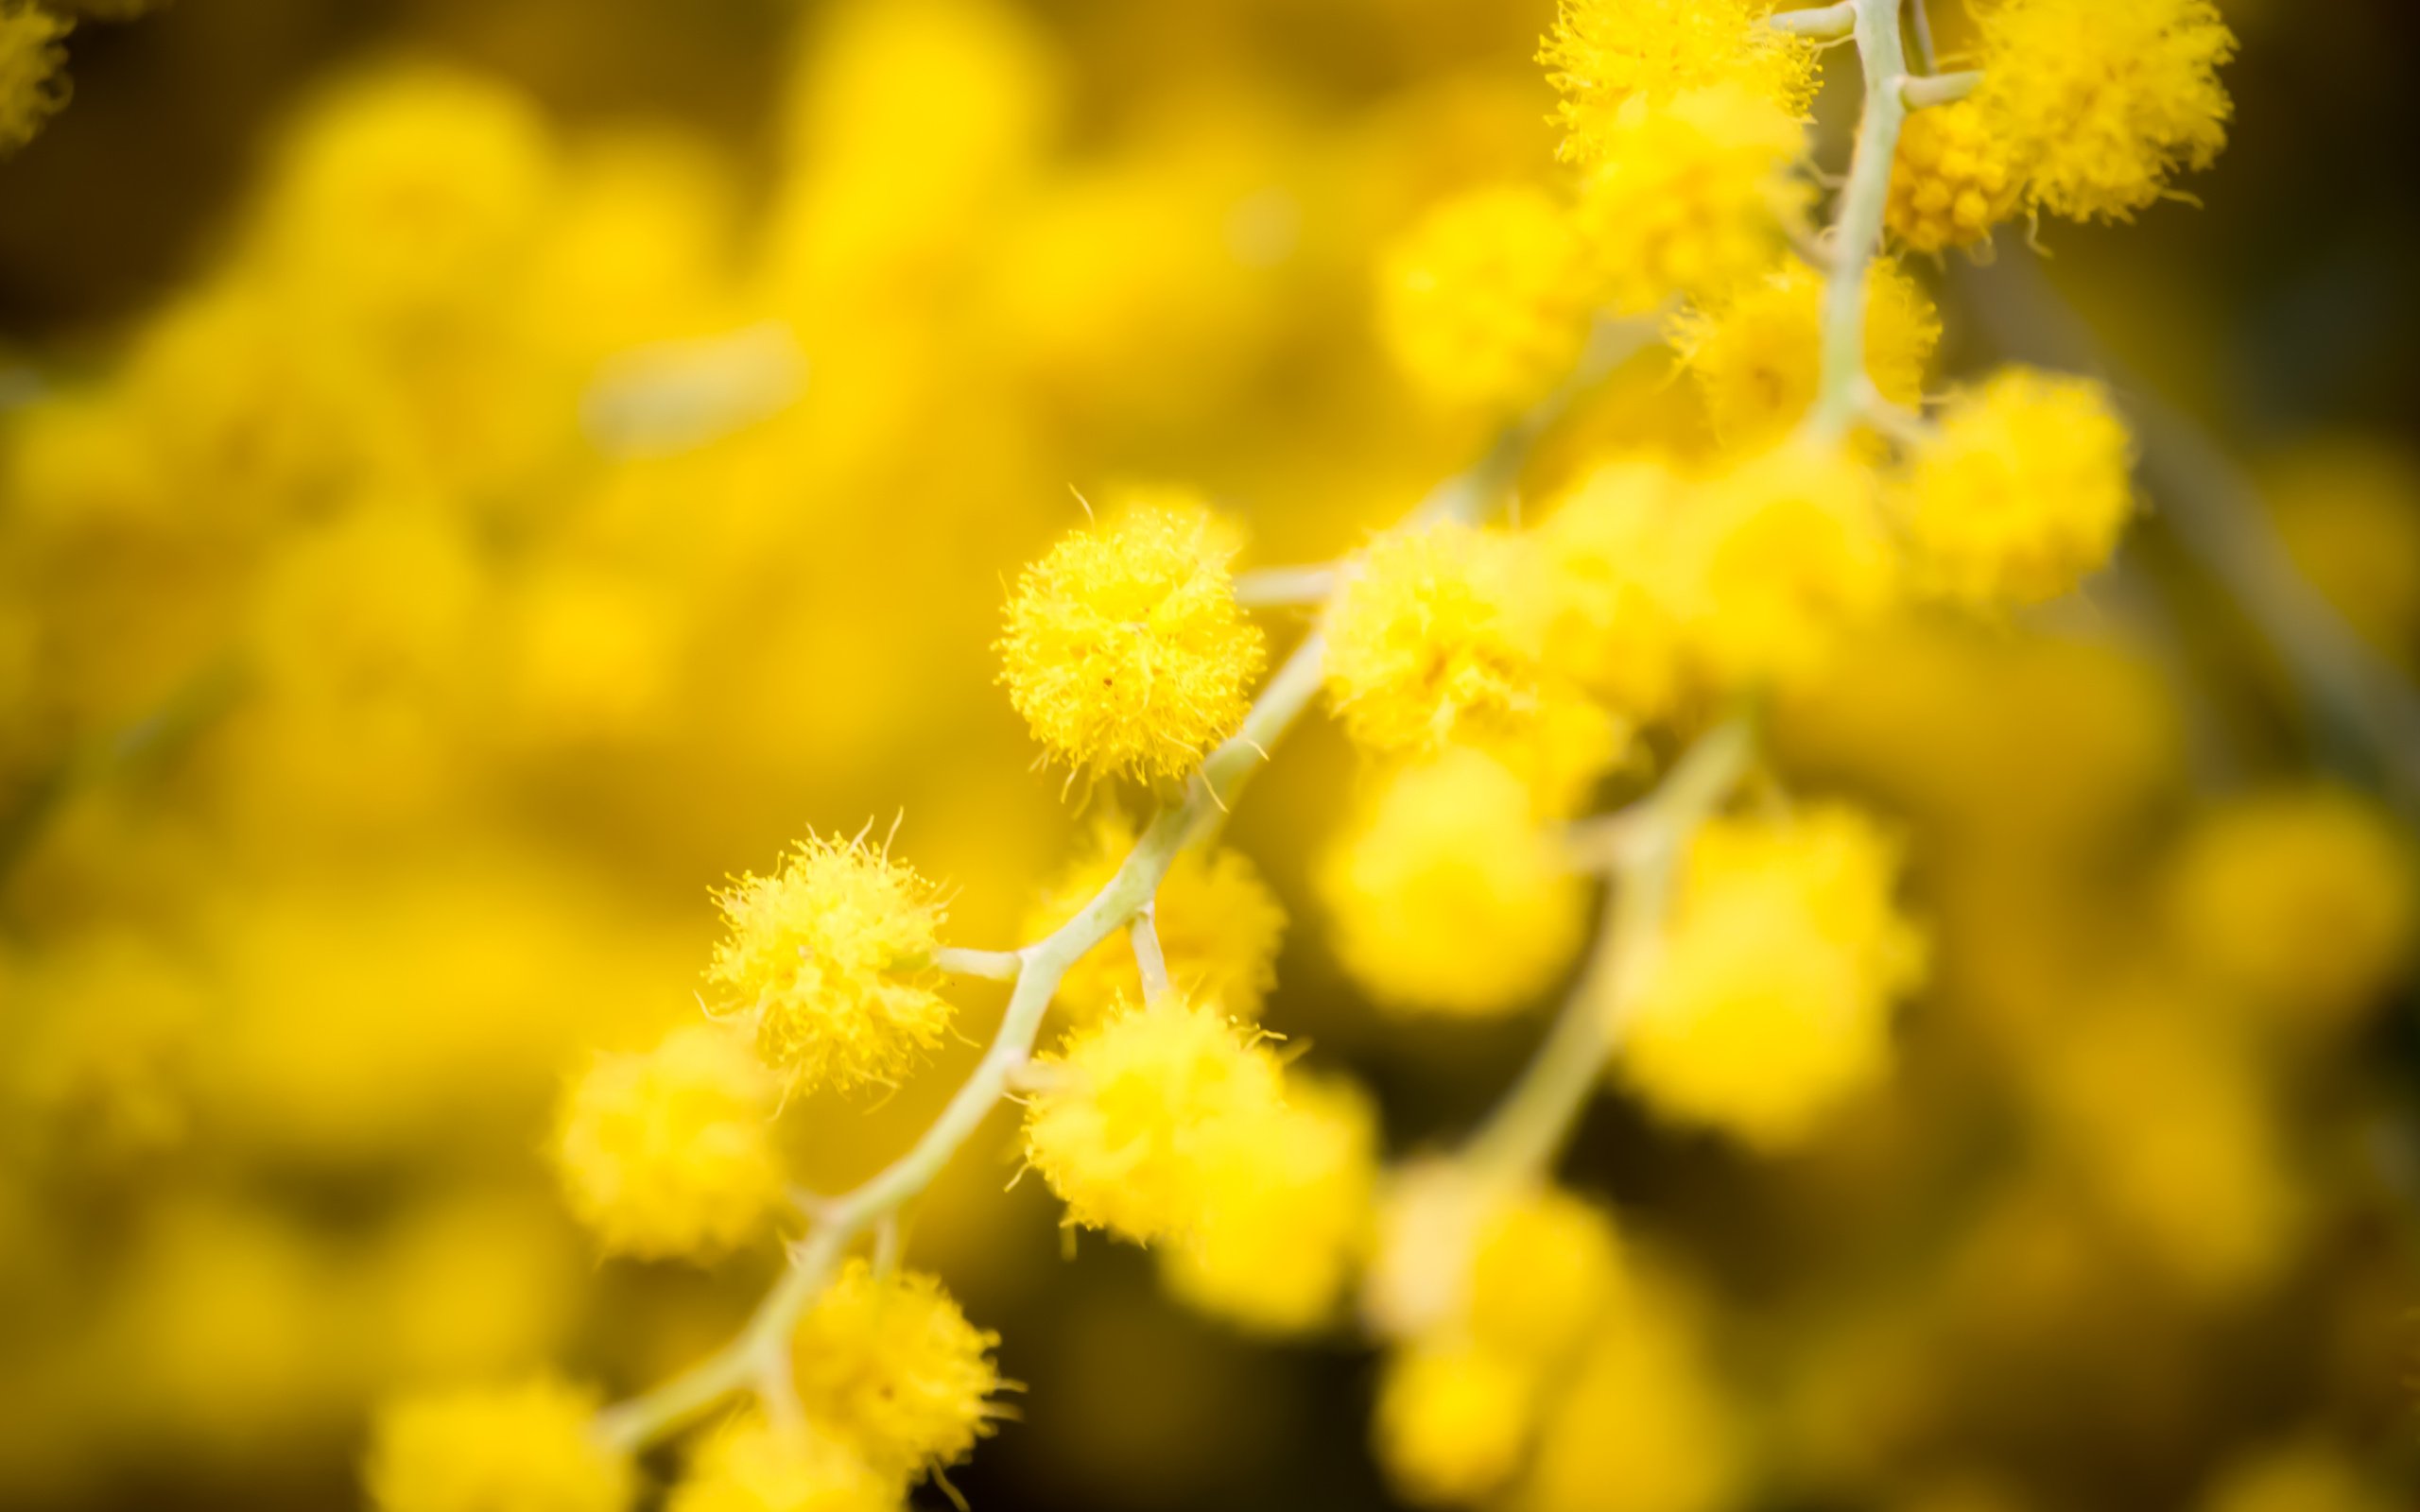 Golden Wattle HD Wallpaper and Background Image